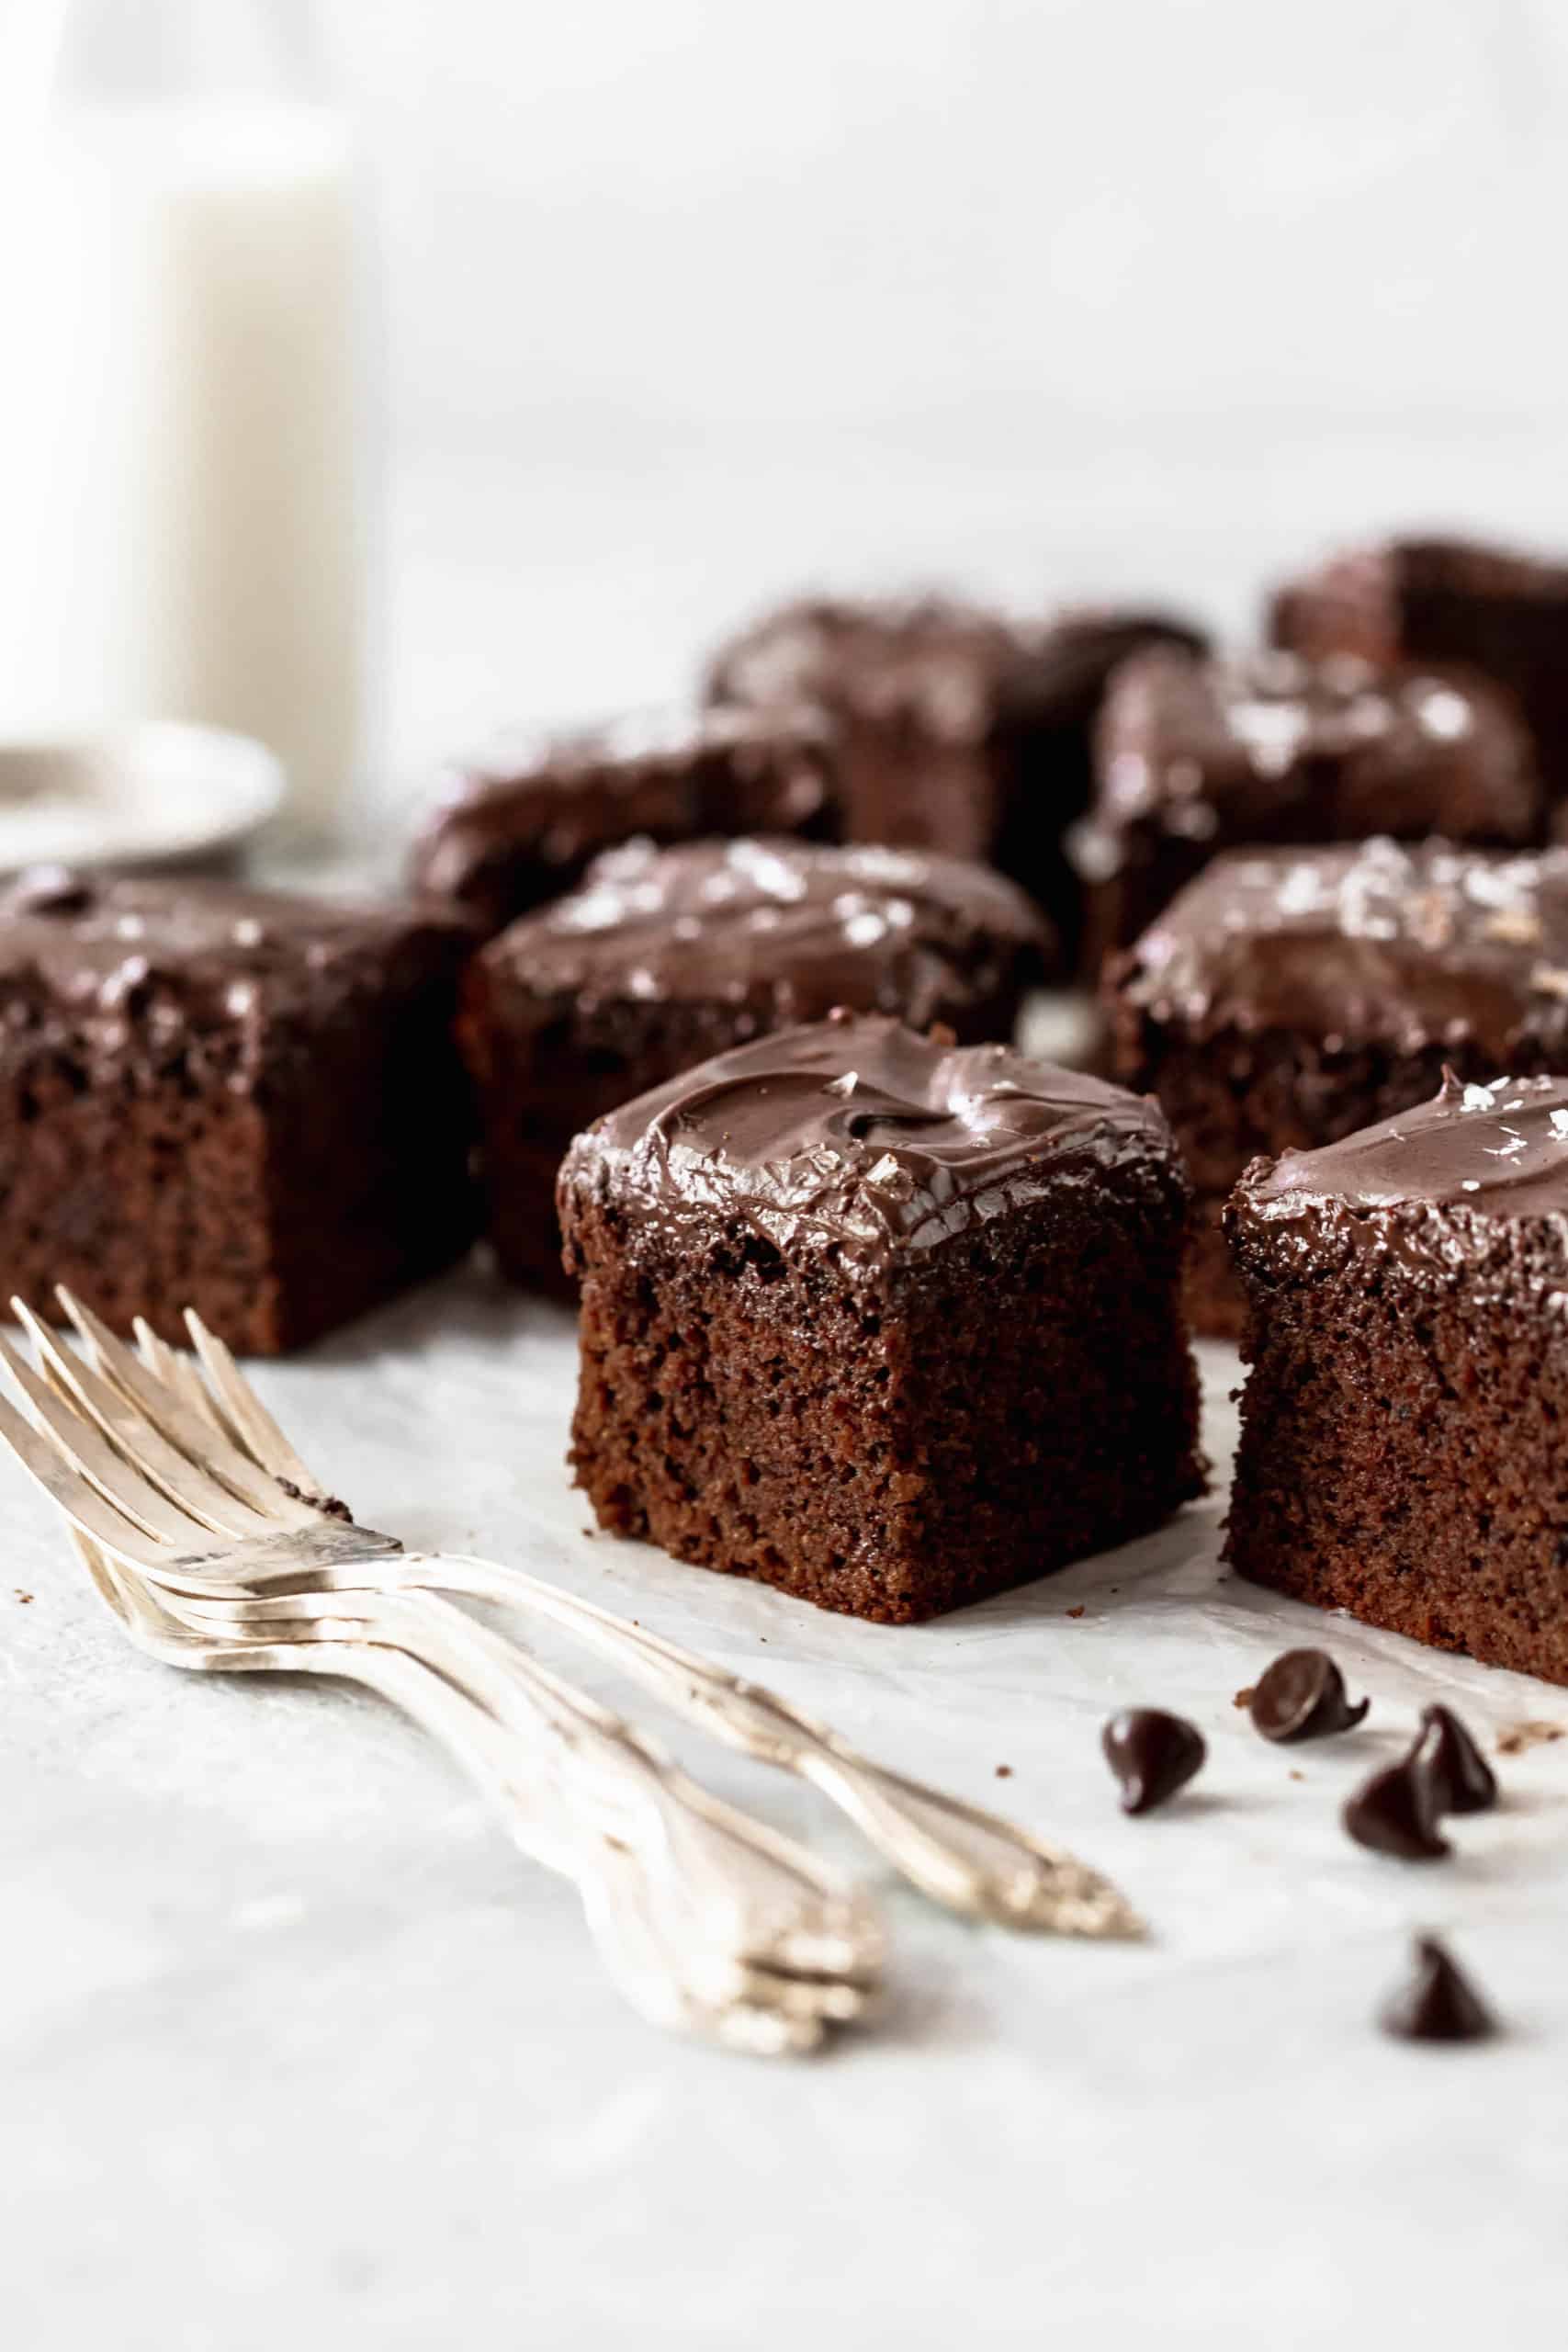 chocolate cake pieces with chocolate frosting on parchment paper